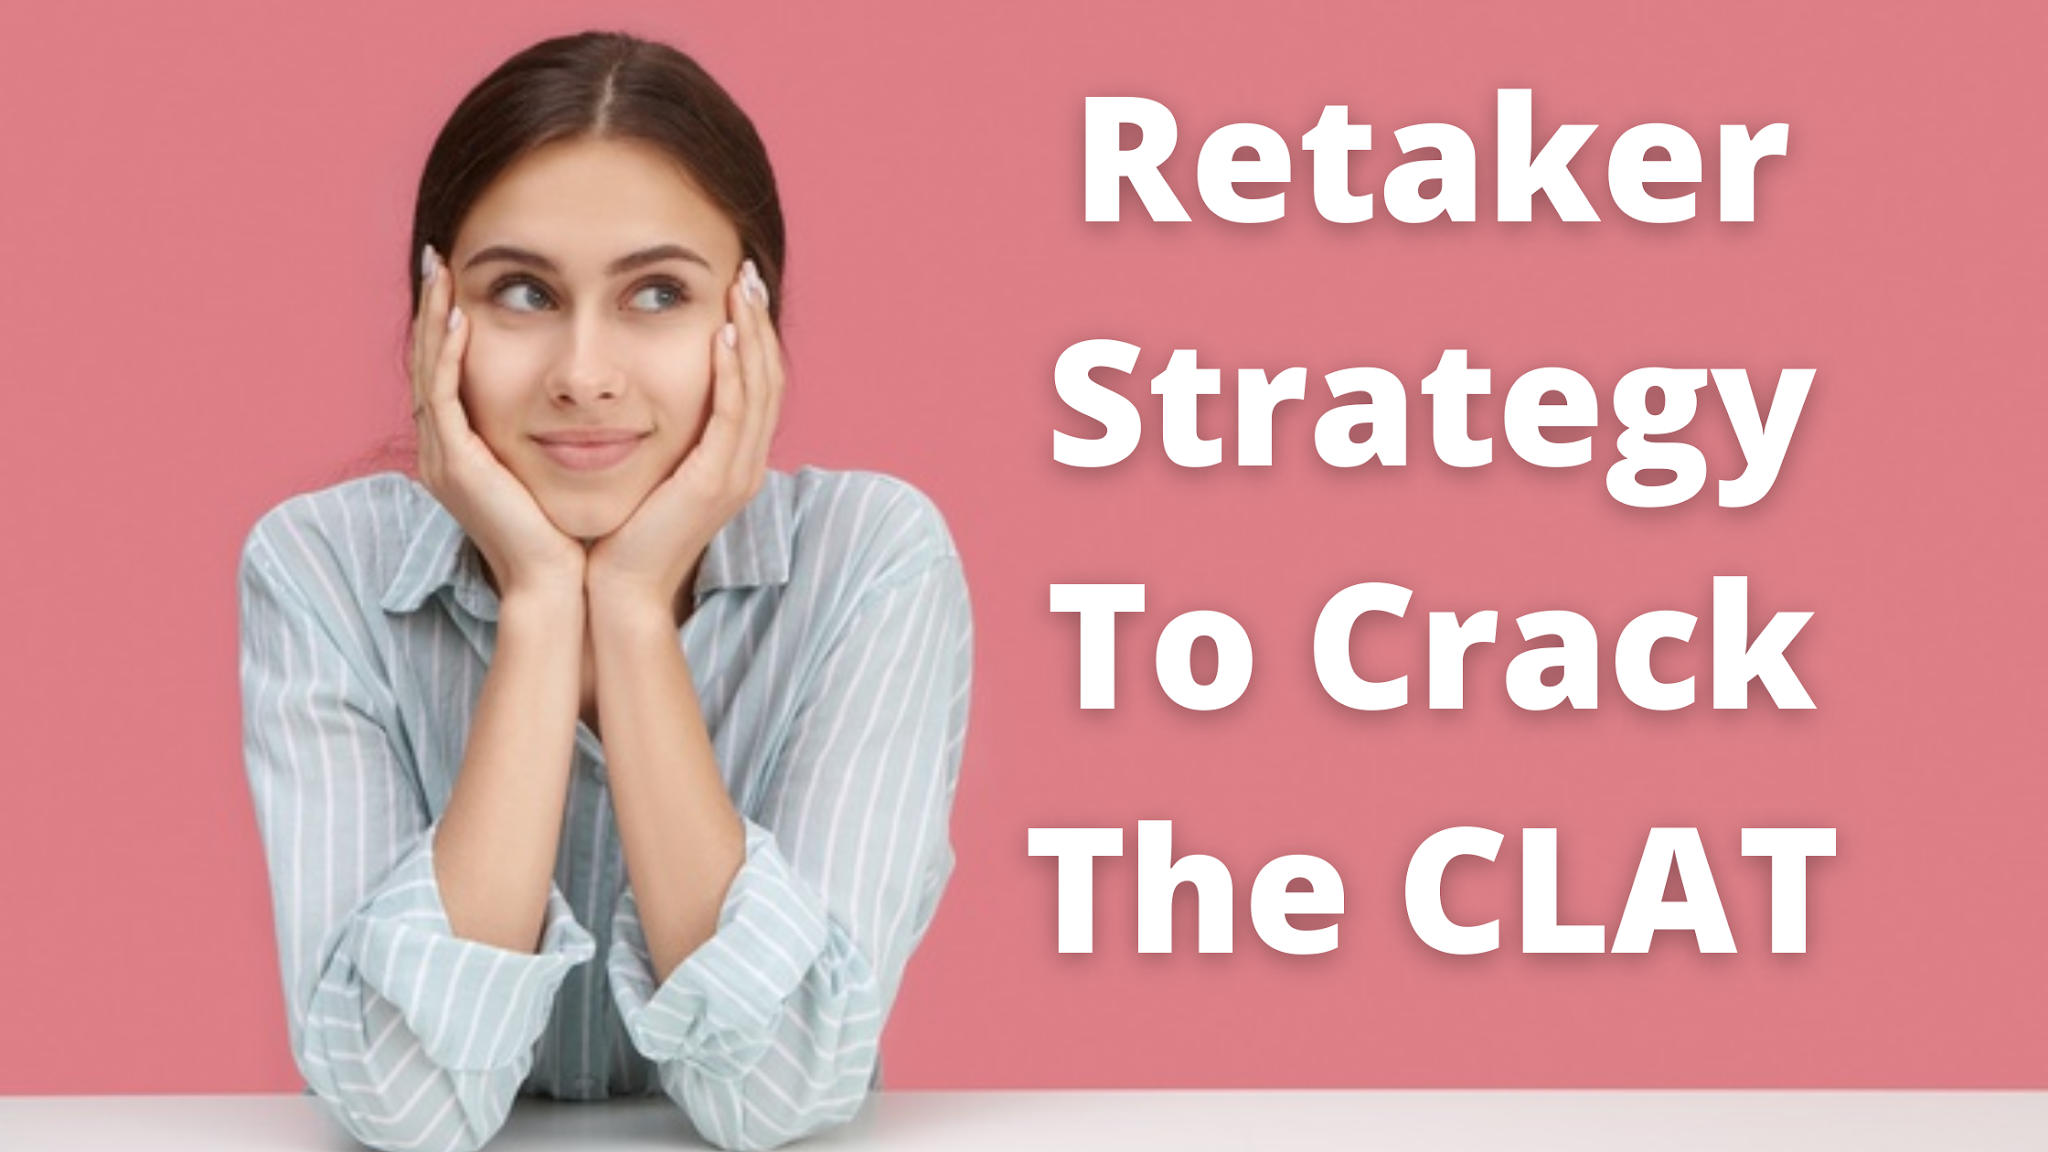 Retaker strategy to crack the clat